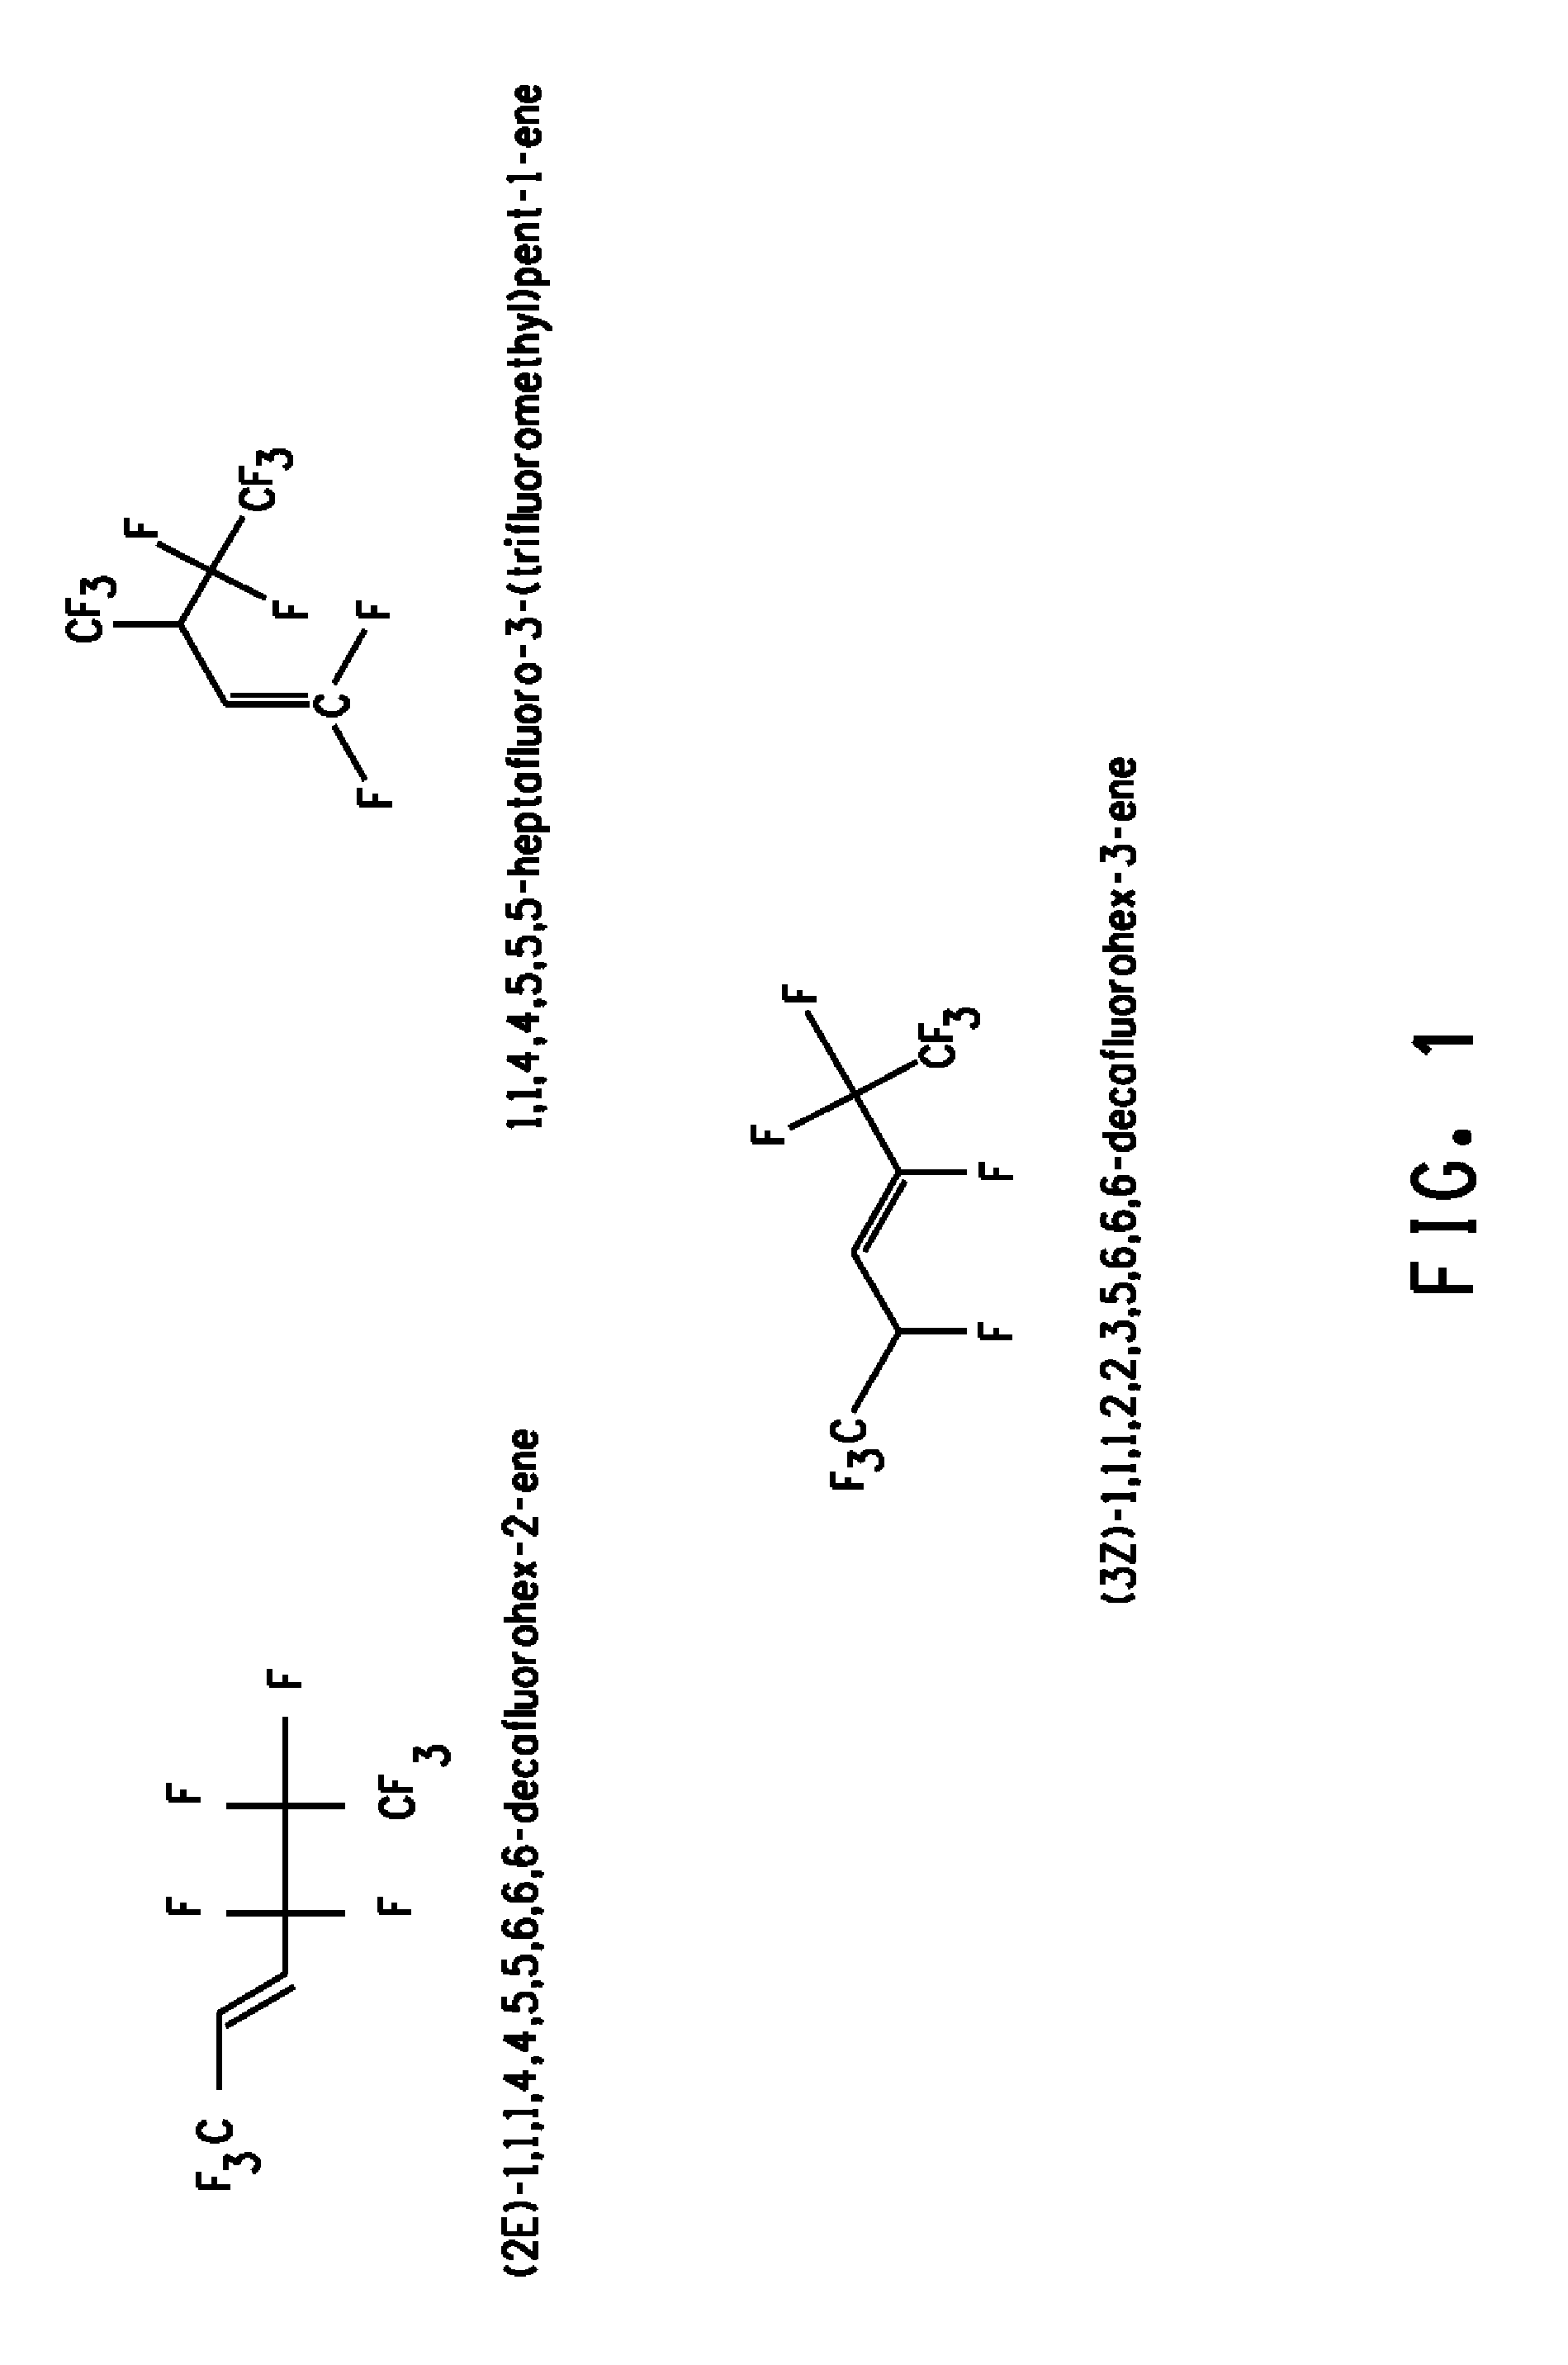 Novel 1,1,1,4,4,5,5,6,6,6-decafluorohex-2-ene isomer mixtures and uses thereof